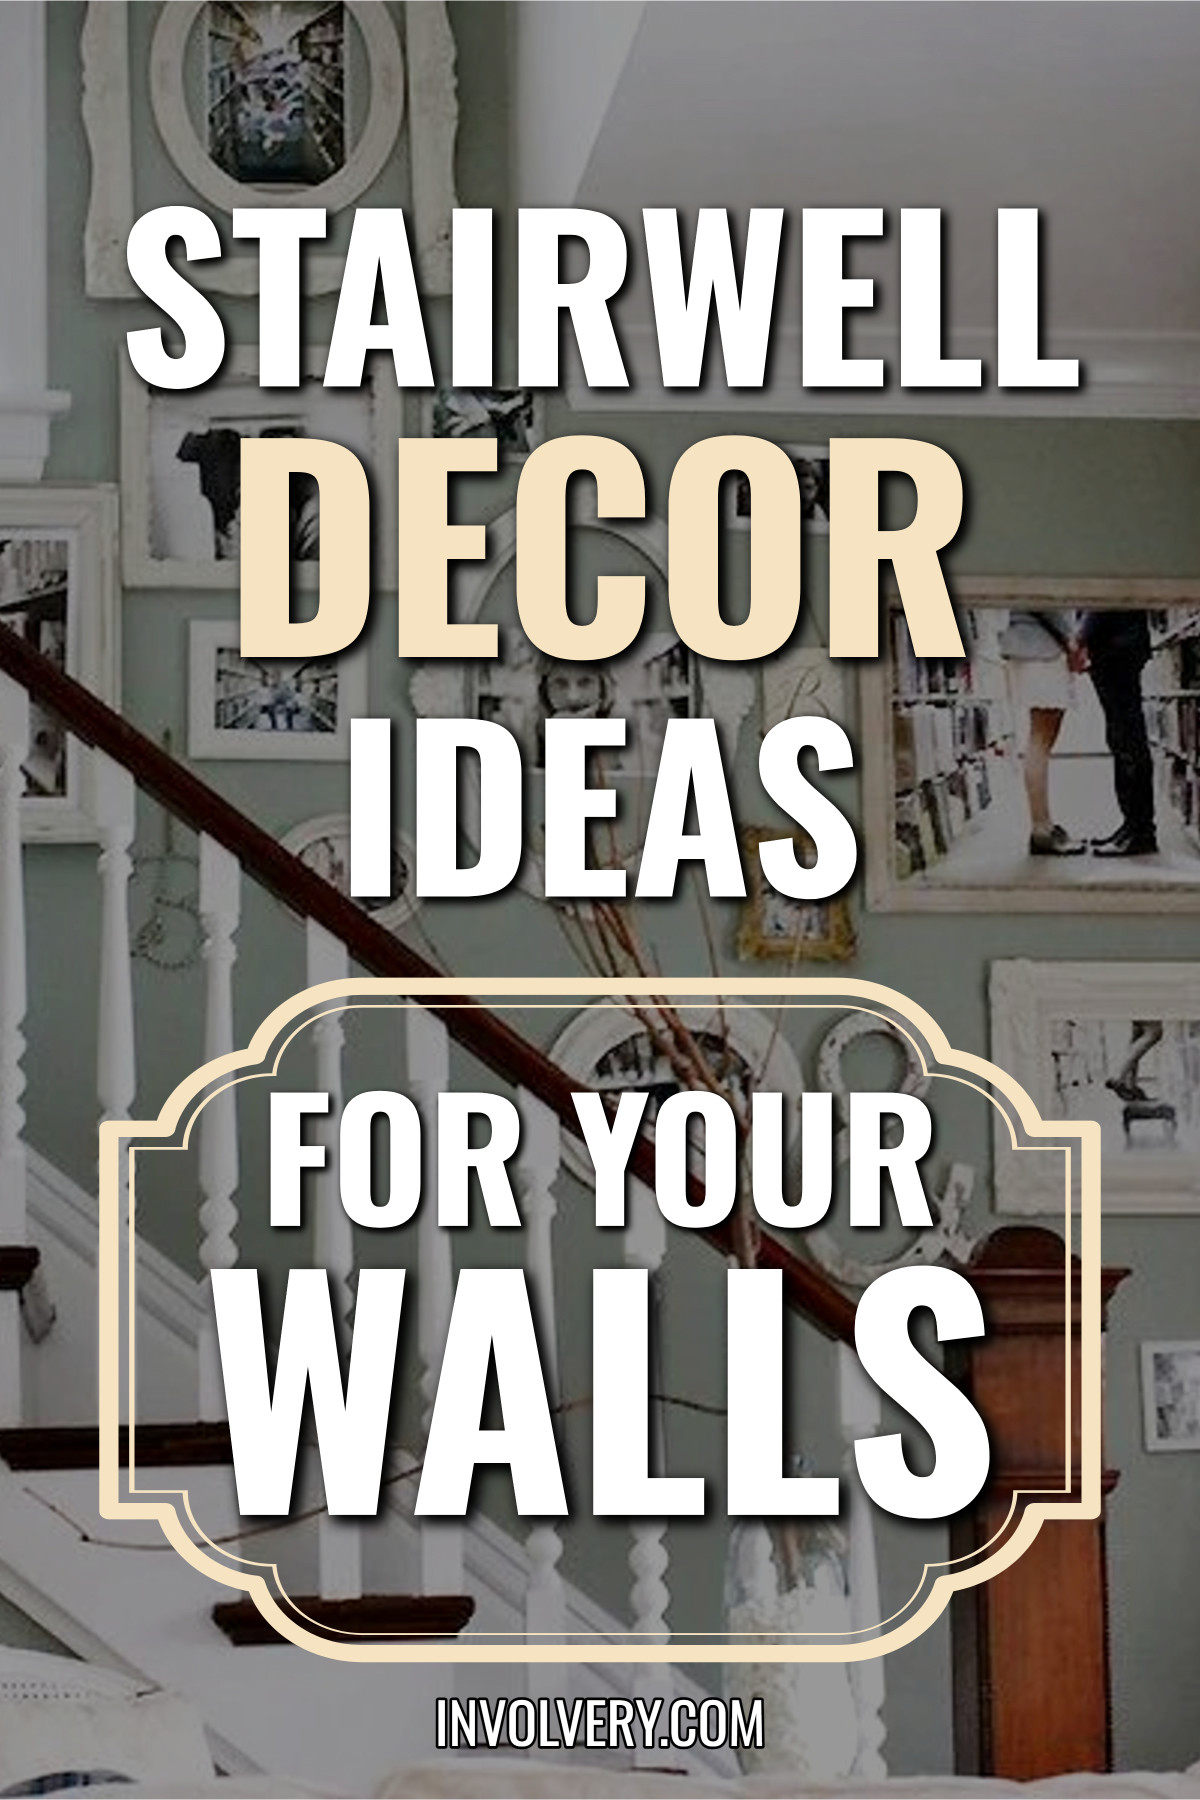 Stairwell Decor Ideas For Your Walls